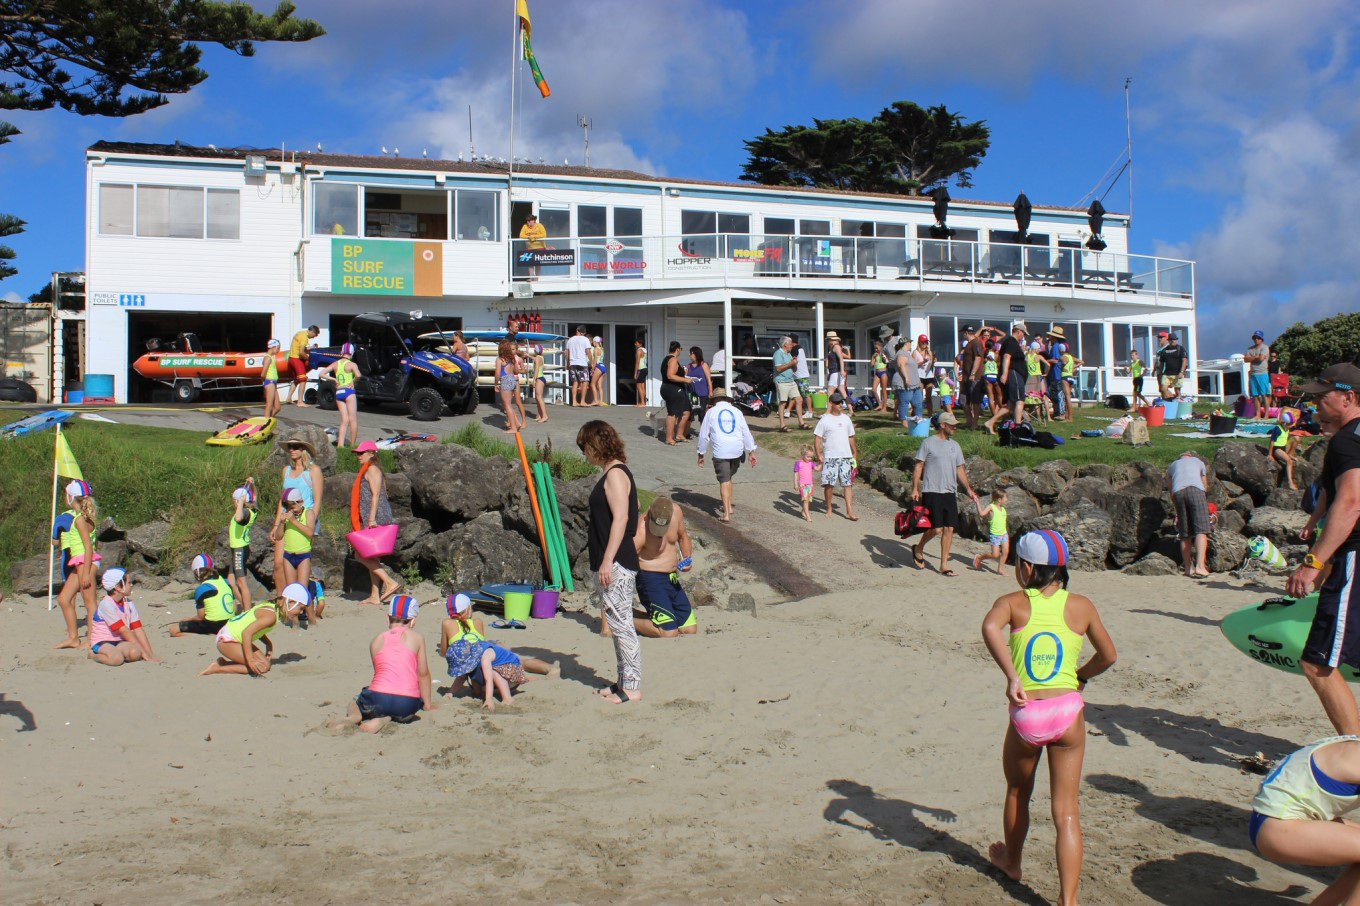 Ōrewa Surf Life Saving club has outgrown its 1960s building and is grateful for the $2 million grant from the Sport and Recreation Facilities Investment Fund to build a new community hub.